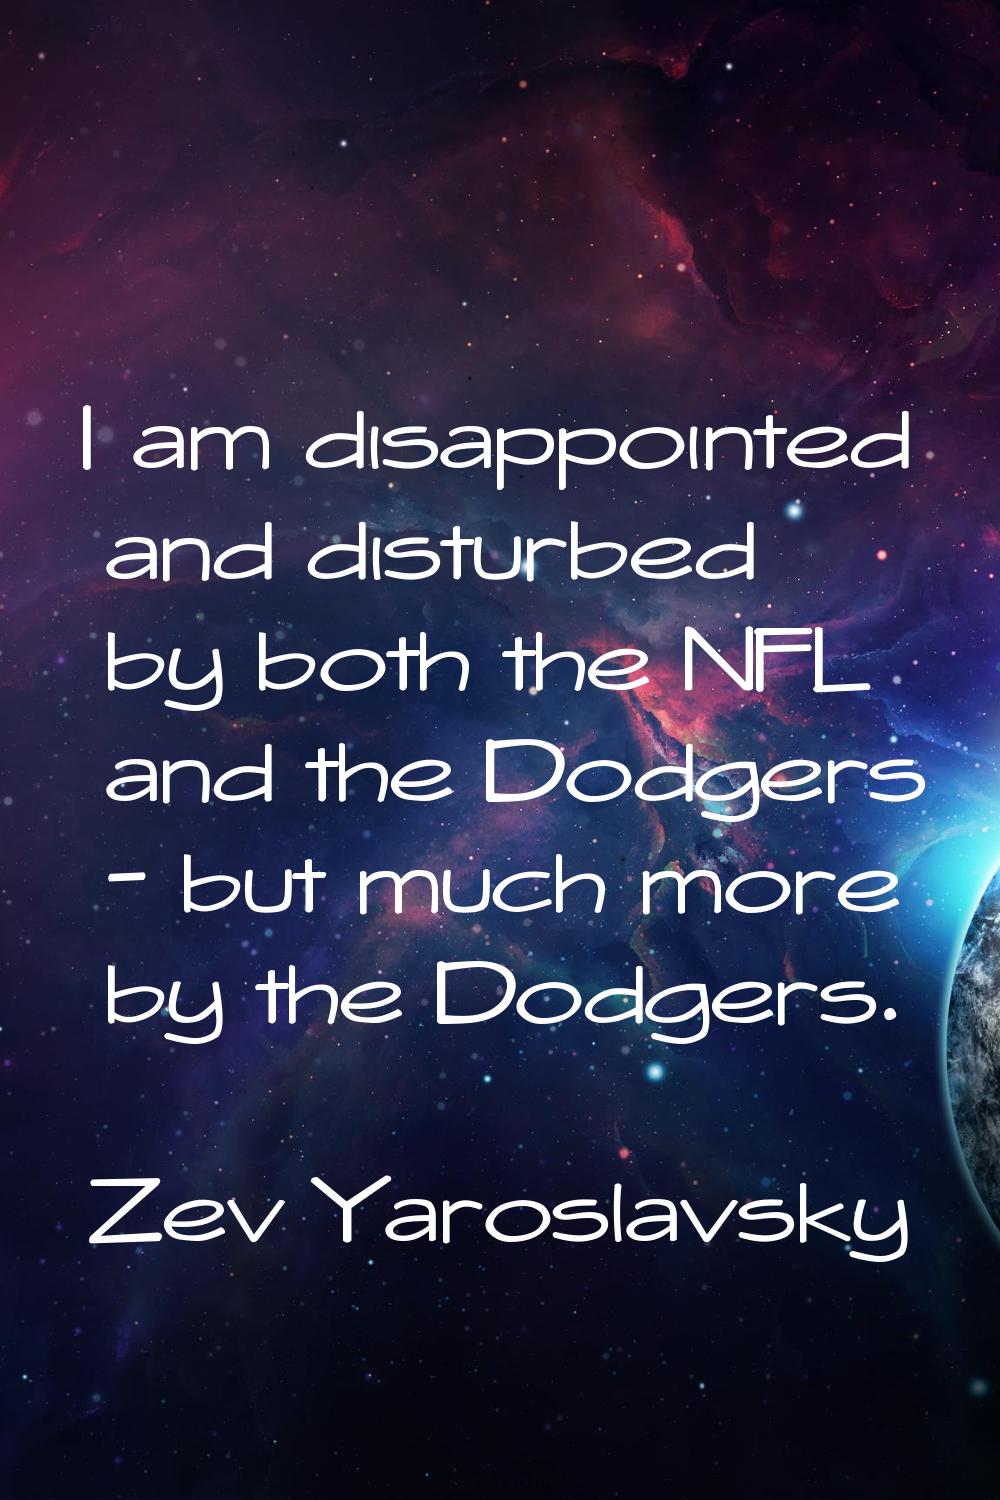 I am disappointed and disturbed by both the NFL and the Dodgers - but much more by the Dodgers.